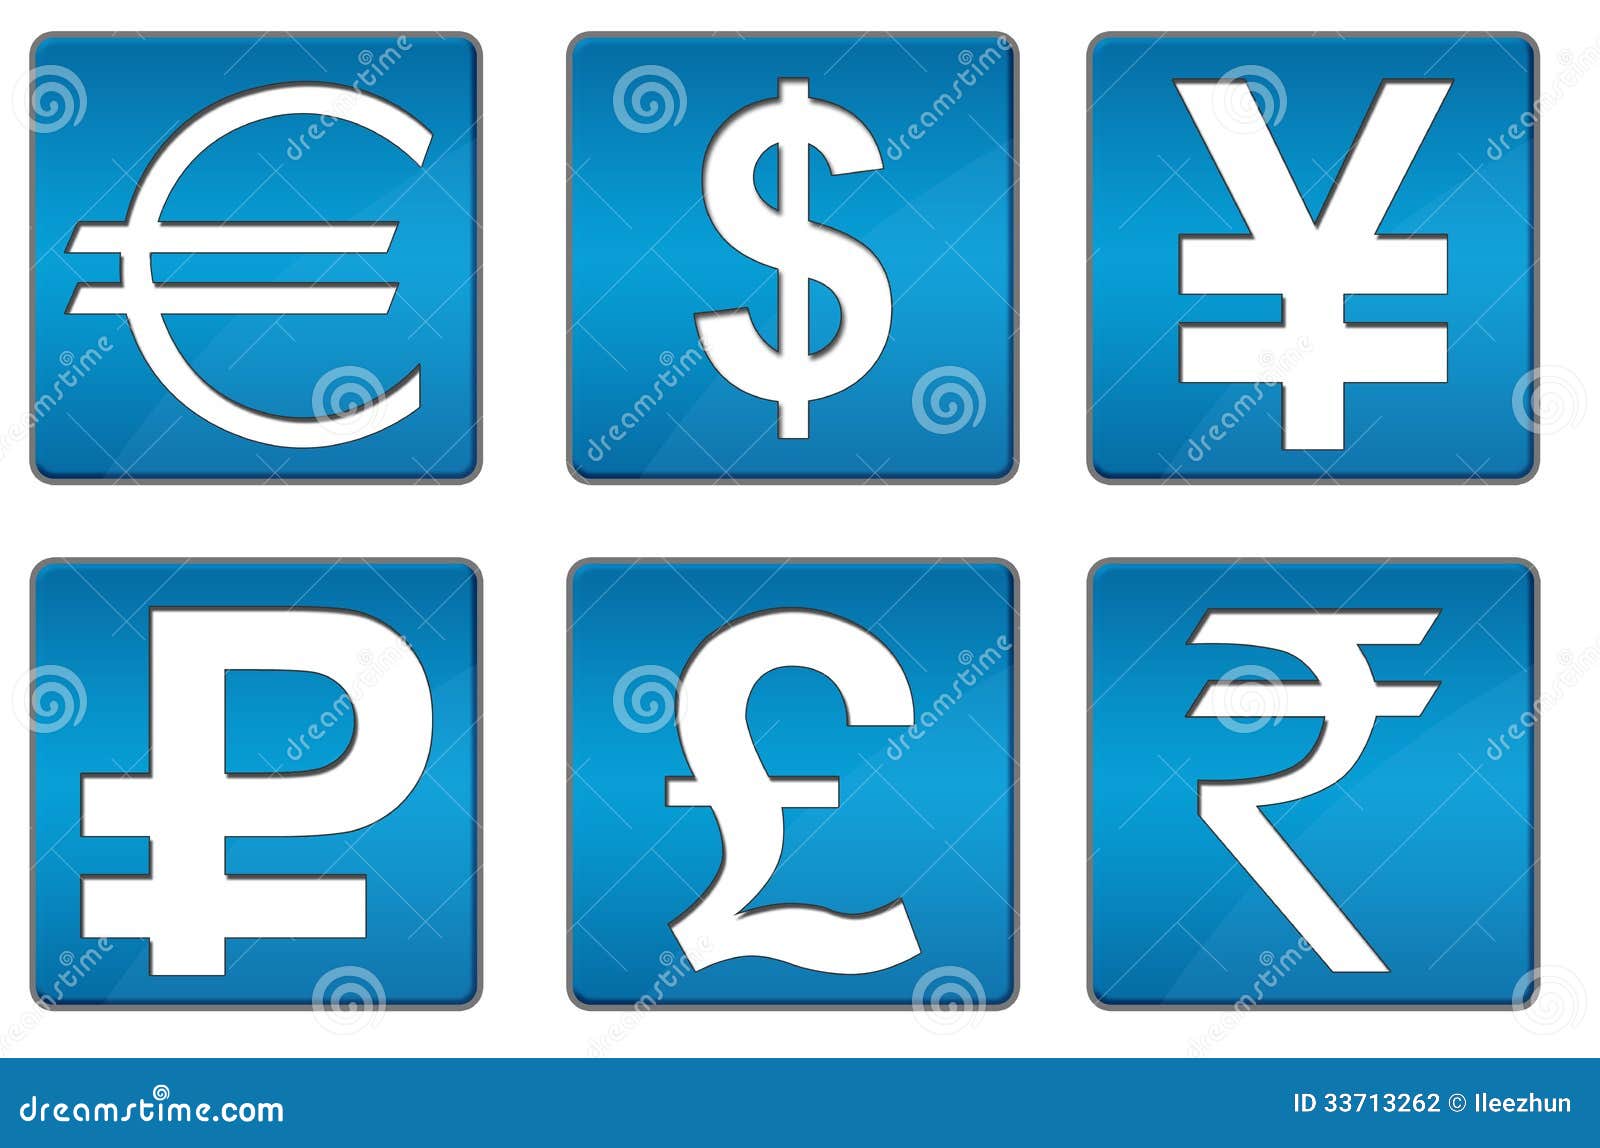 All Currency Icons Blue Square Stock Illustration ...